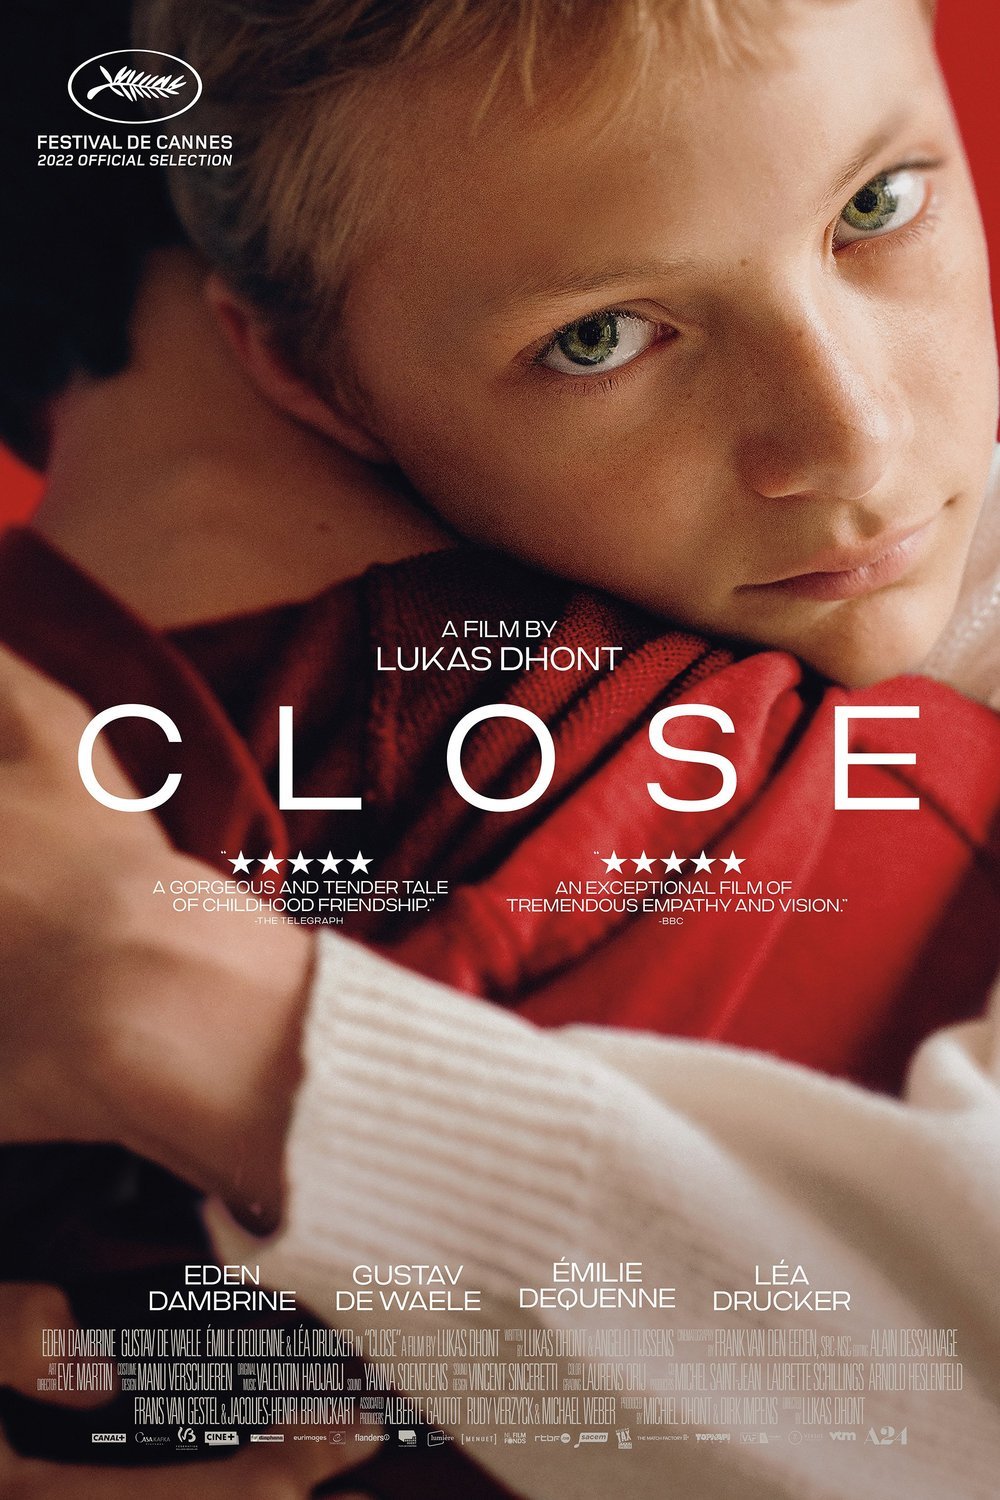 Poster of the movie Close